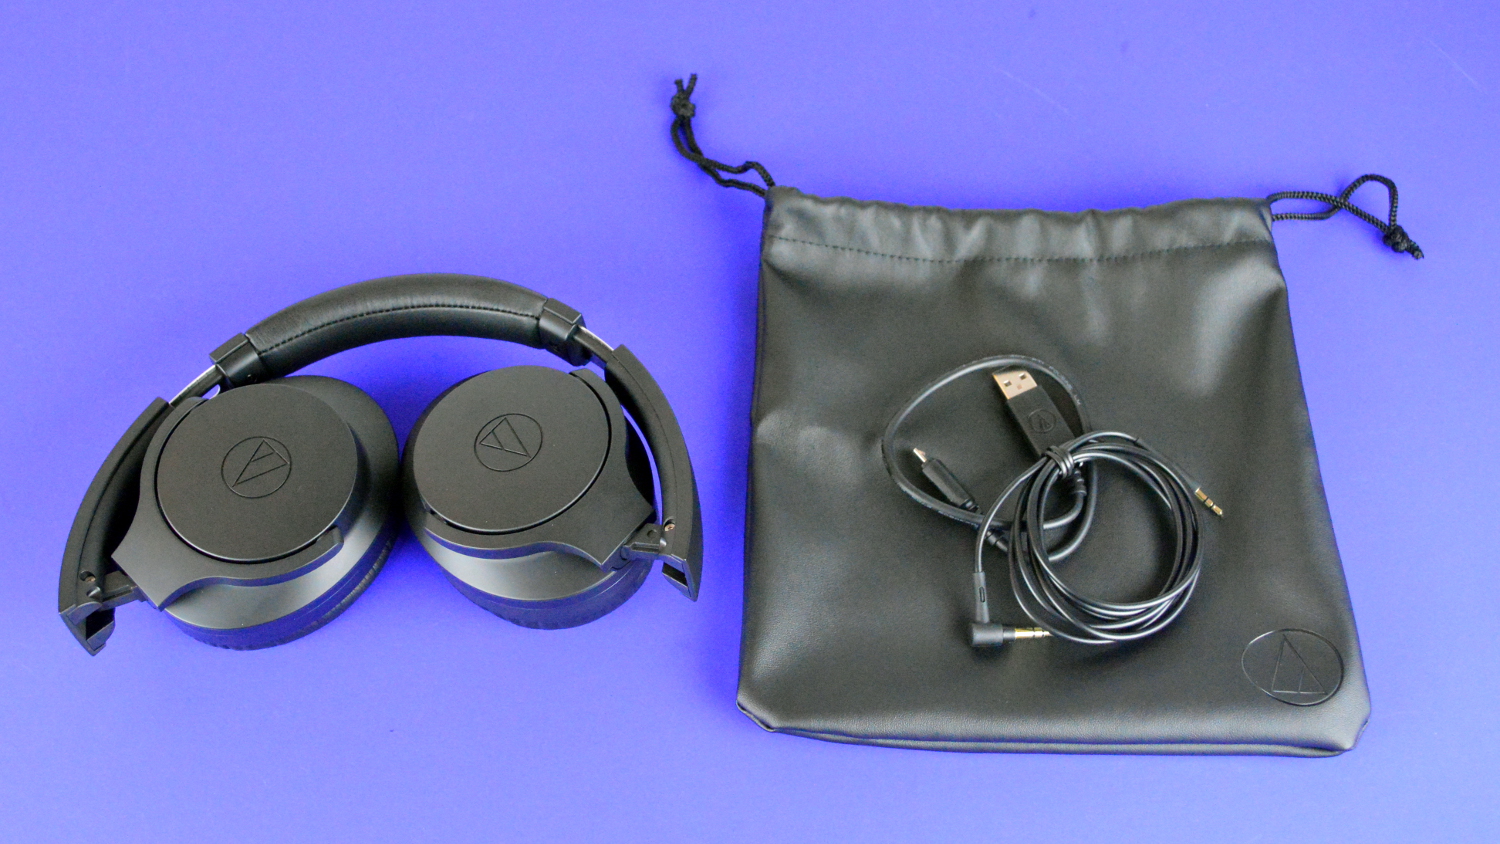 Audio Technica ATH-ANC700BT Included